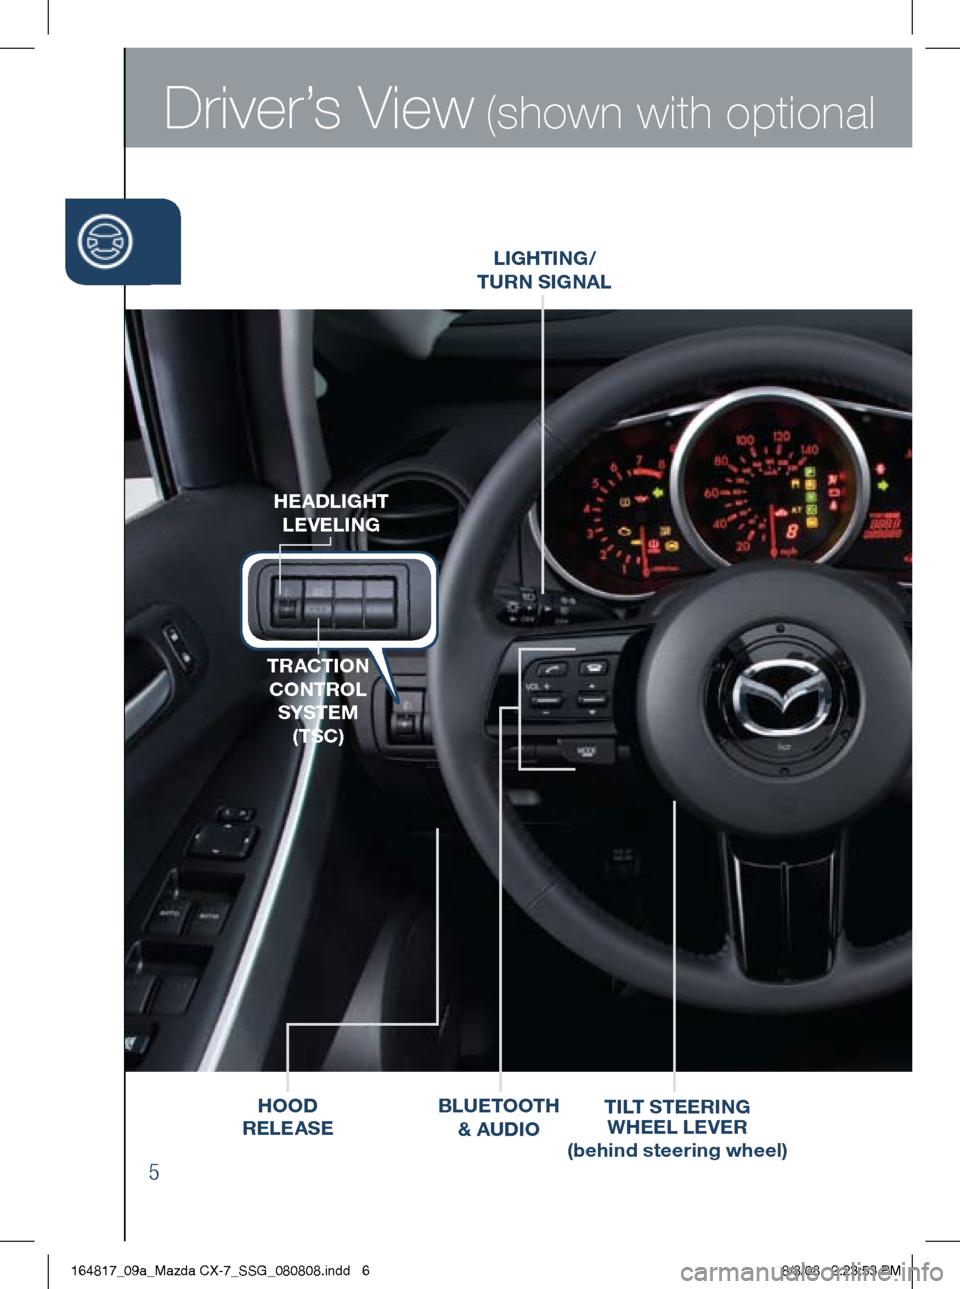 MAZDA MODEL CX-7 2009  Smart Start Guide (in English) Driver’s View (shown with optional
5
LighTiNg/  
T URN S igNAL
hEADLigh T 
LEVELi Ng
TRACT iON 
CONTROL  SYSTE m 
(TSC)
h OOD 
RELEASE Ti
LT STEER iN g   
wh EEL  LEVER
( behind steering wheel)BLUET